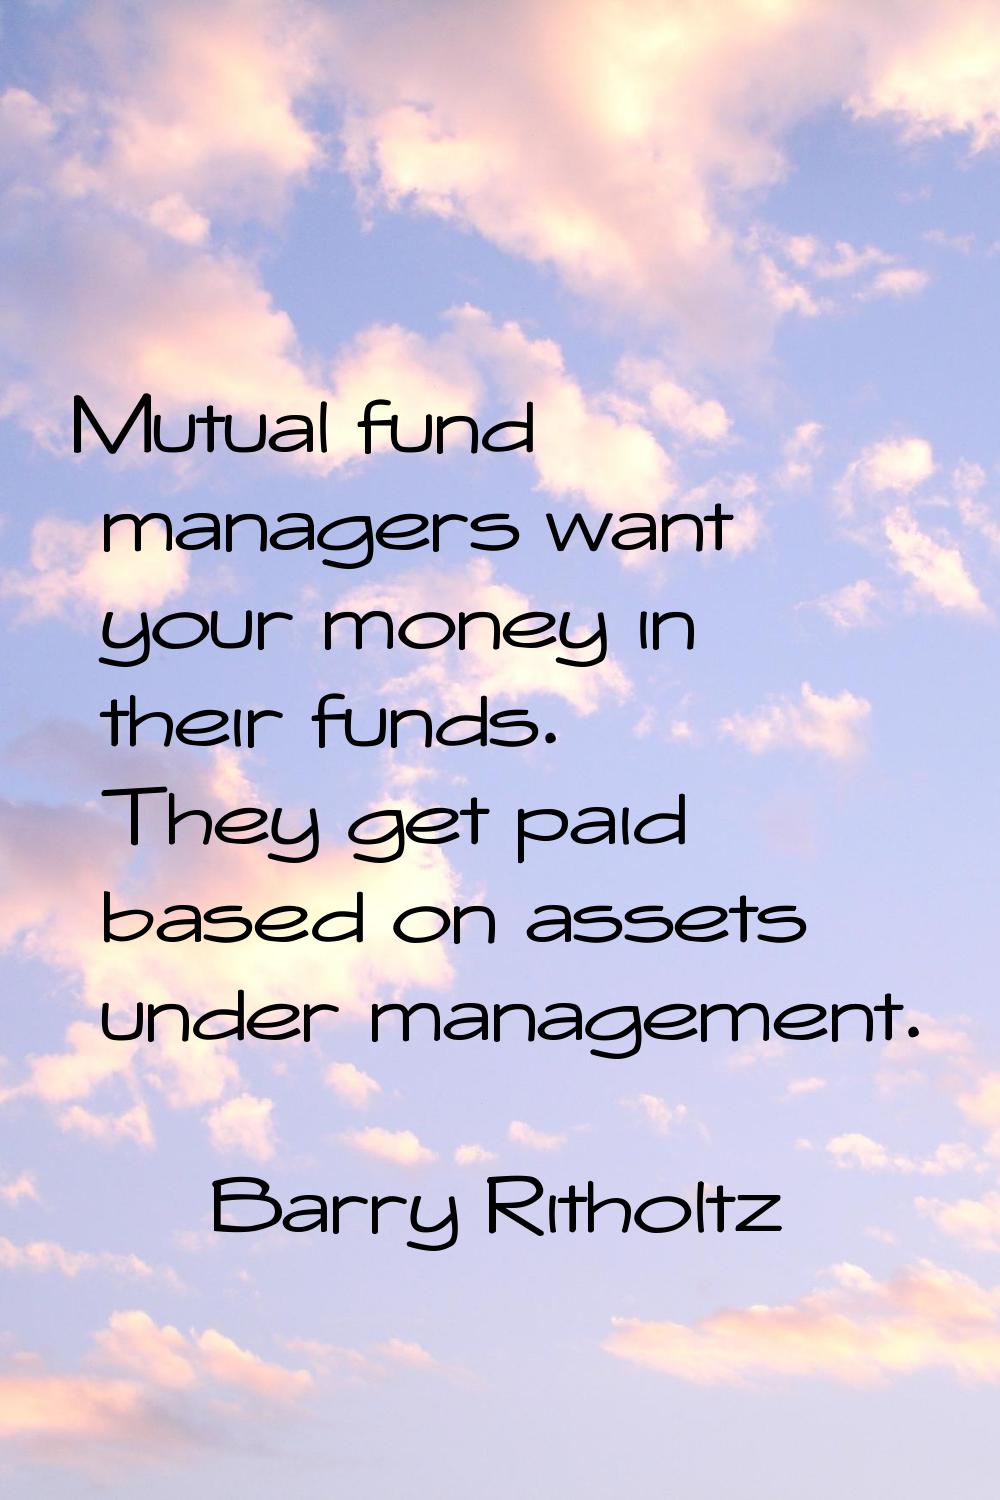 Mutual fund managers want your money in their funds. They get paid based on assets under management